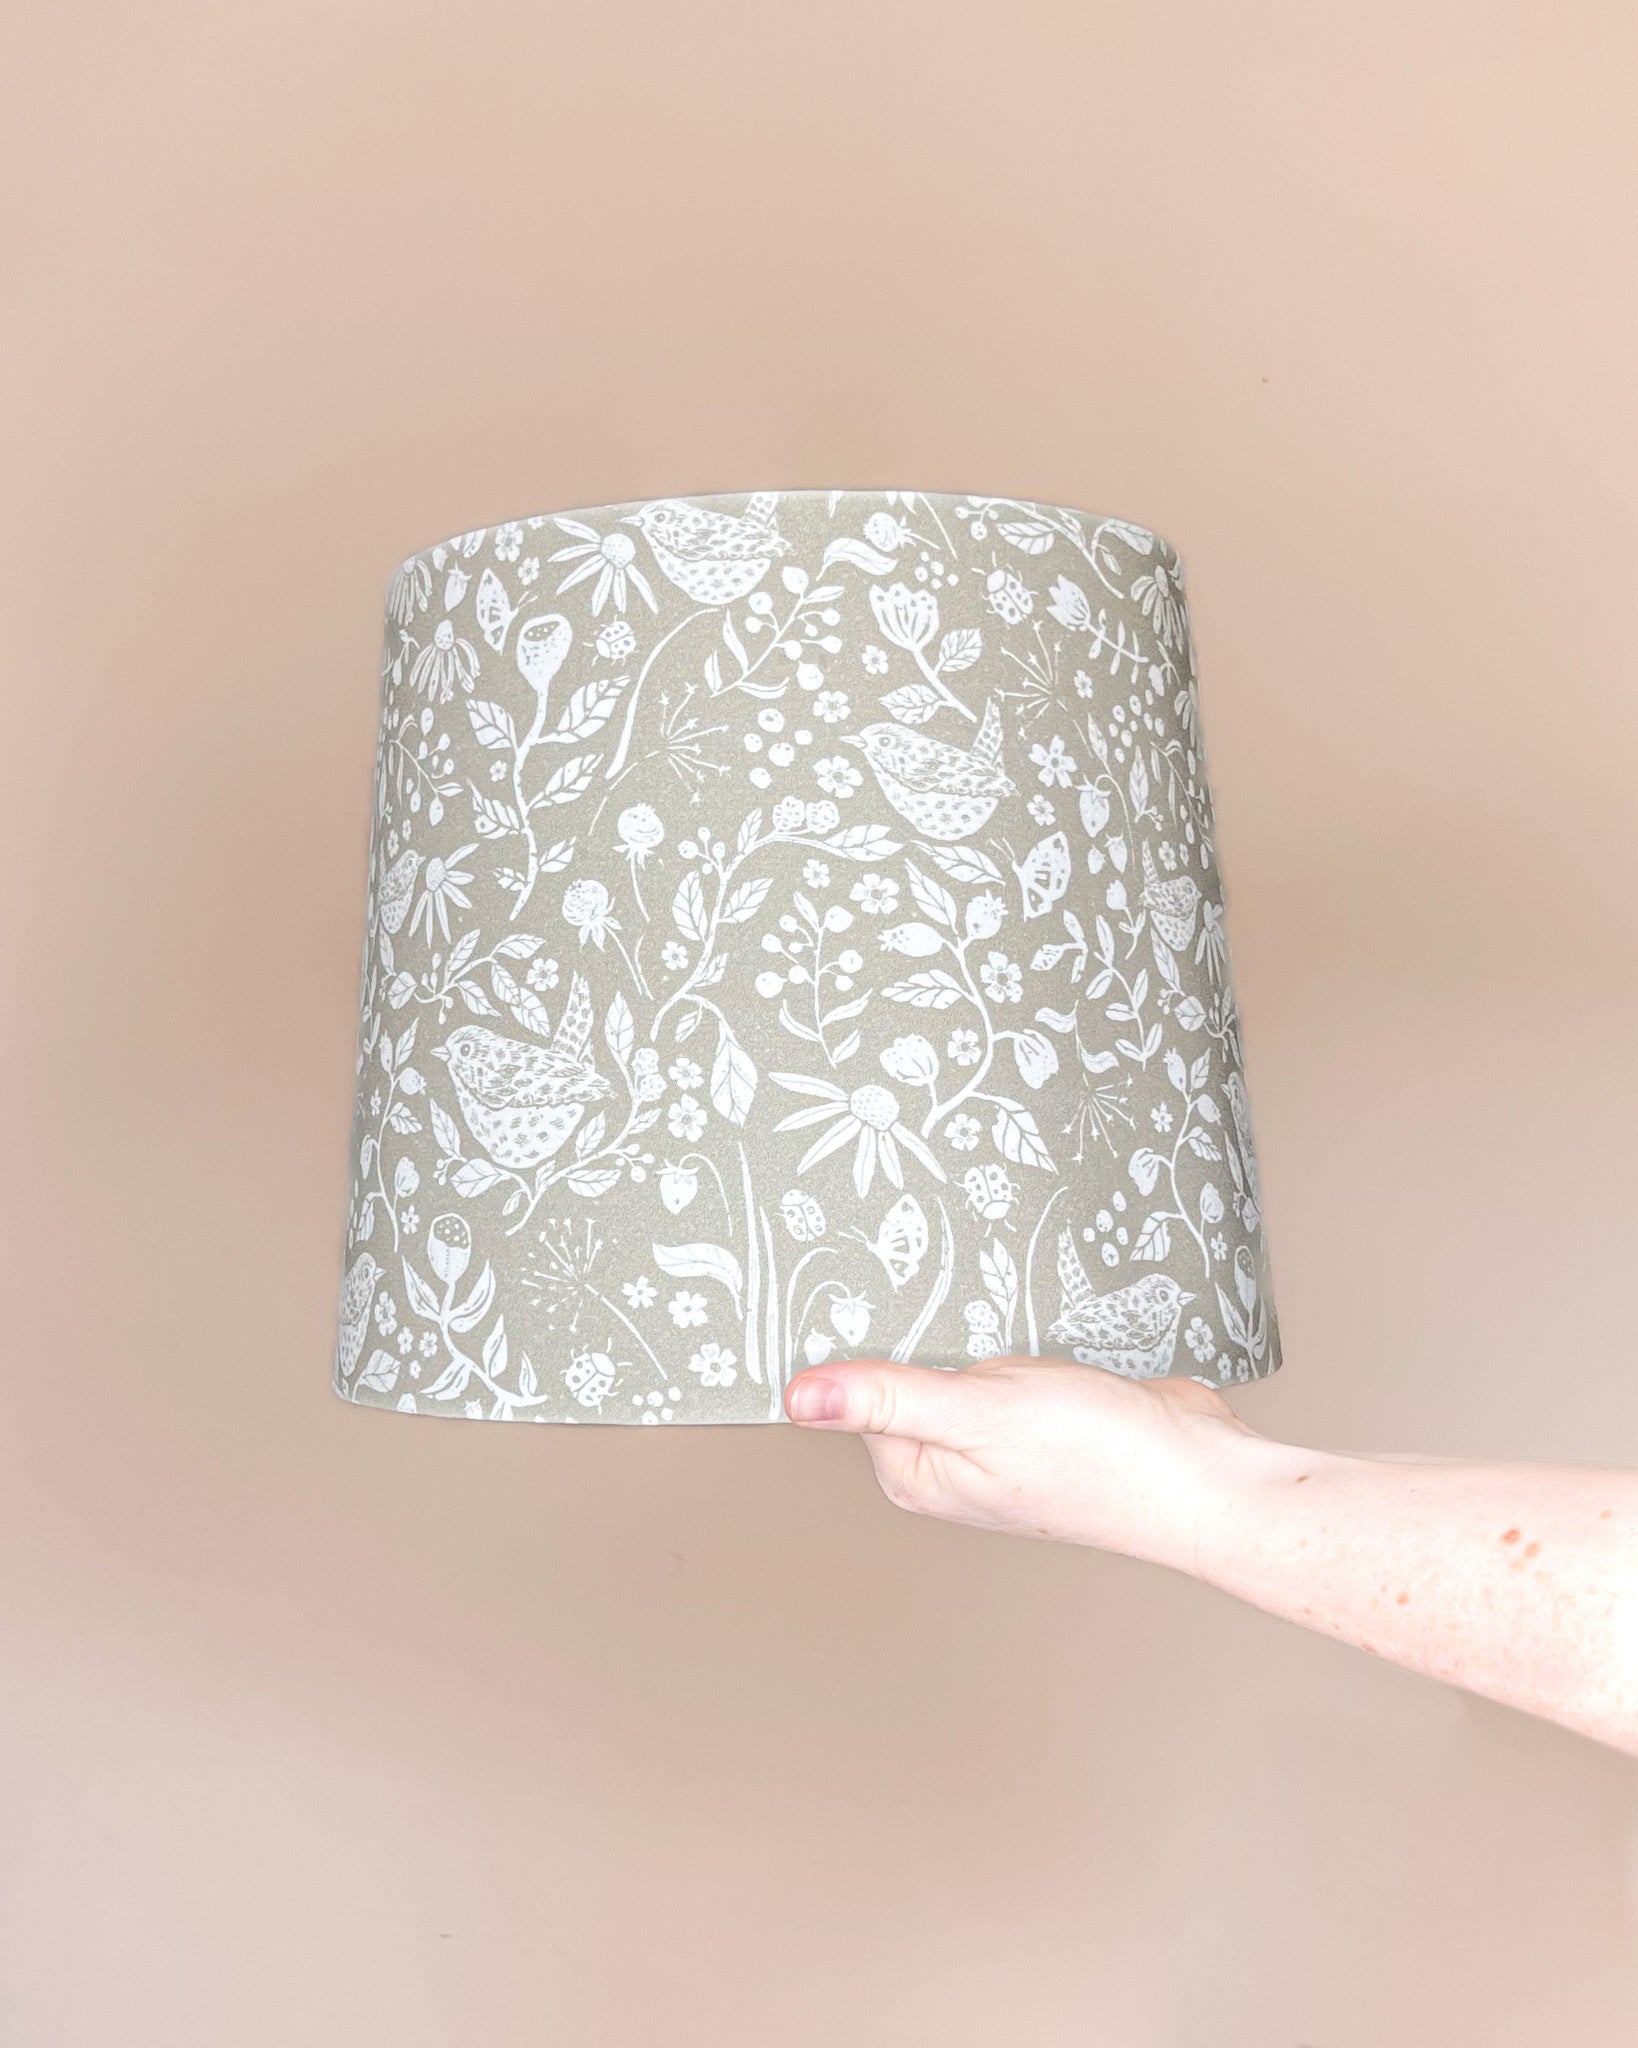 Handmade Wren’s Hedgerow botanical lampshade with a Jenny Wren, flora, and fauna design on warm stone fabric.